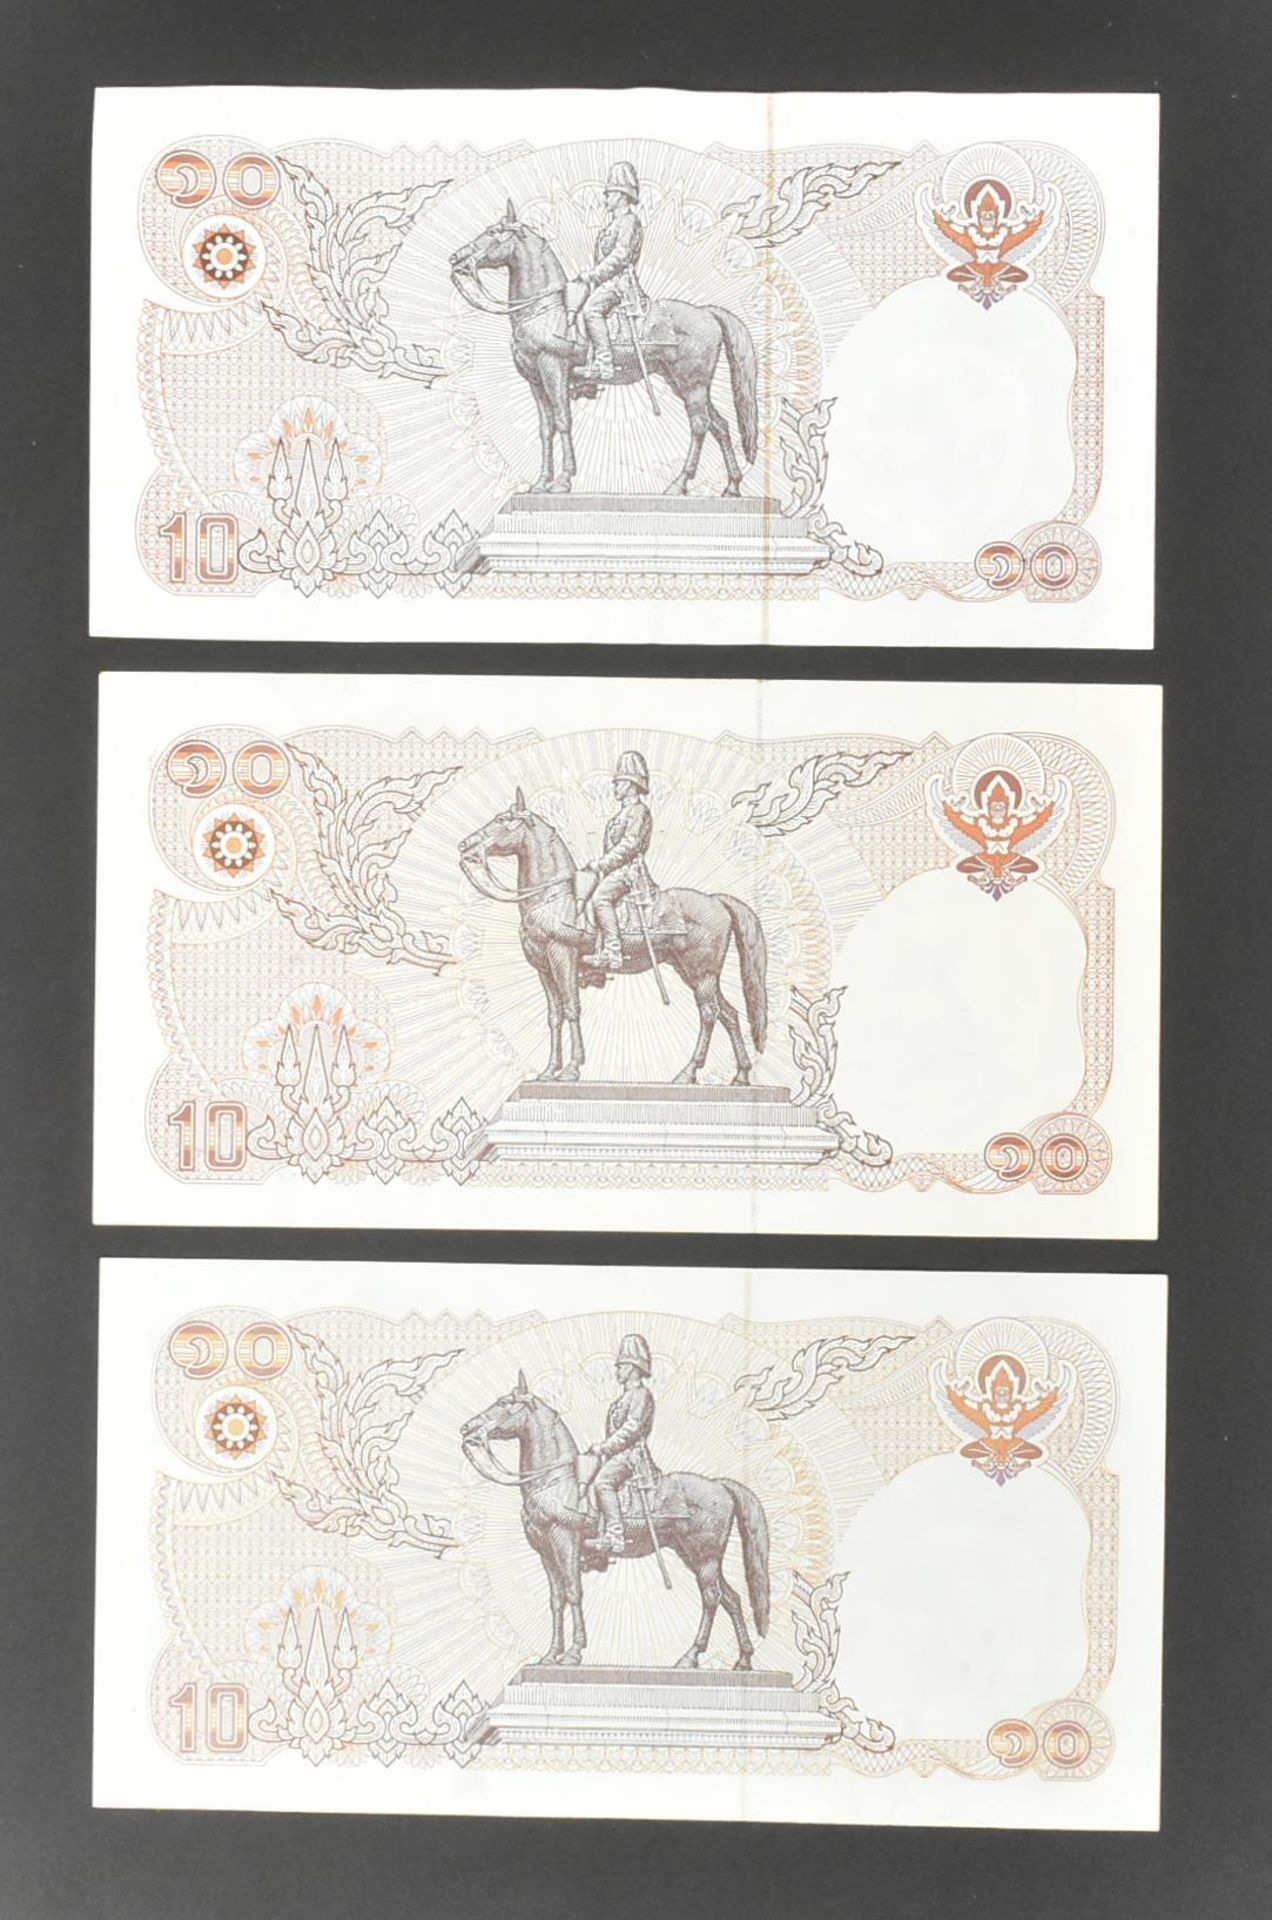 COLLECTION OF INTERNATIONAL UNCIRCULATED BANK NOTES - Image 6 of 36